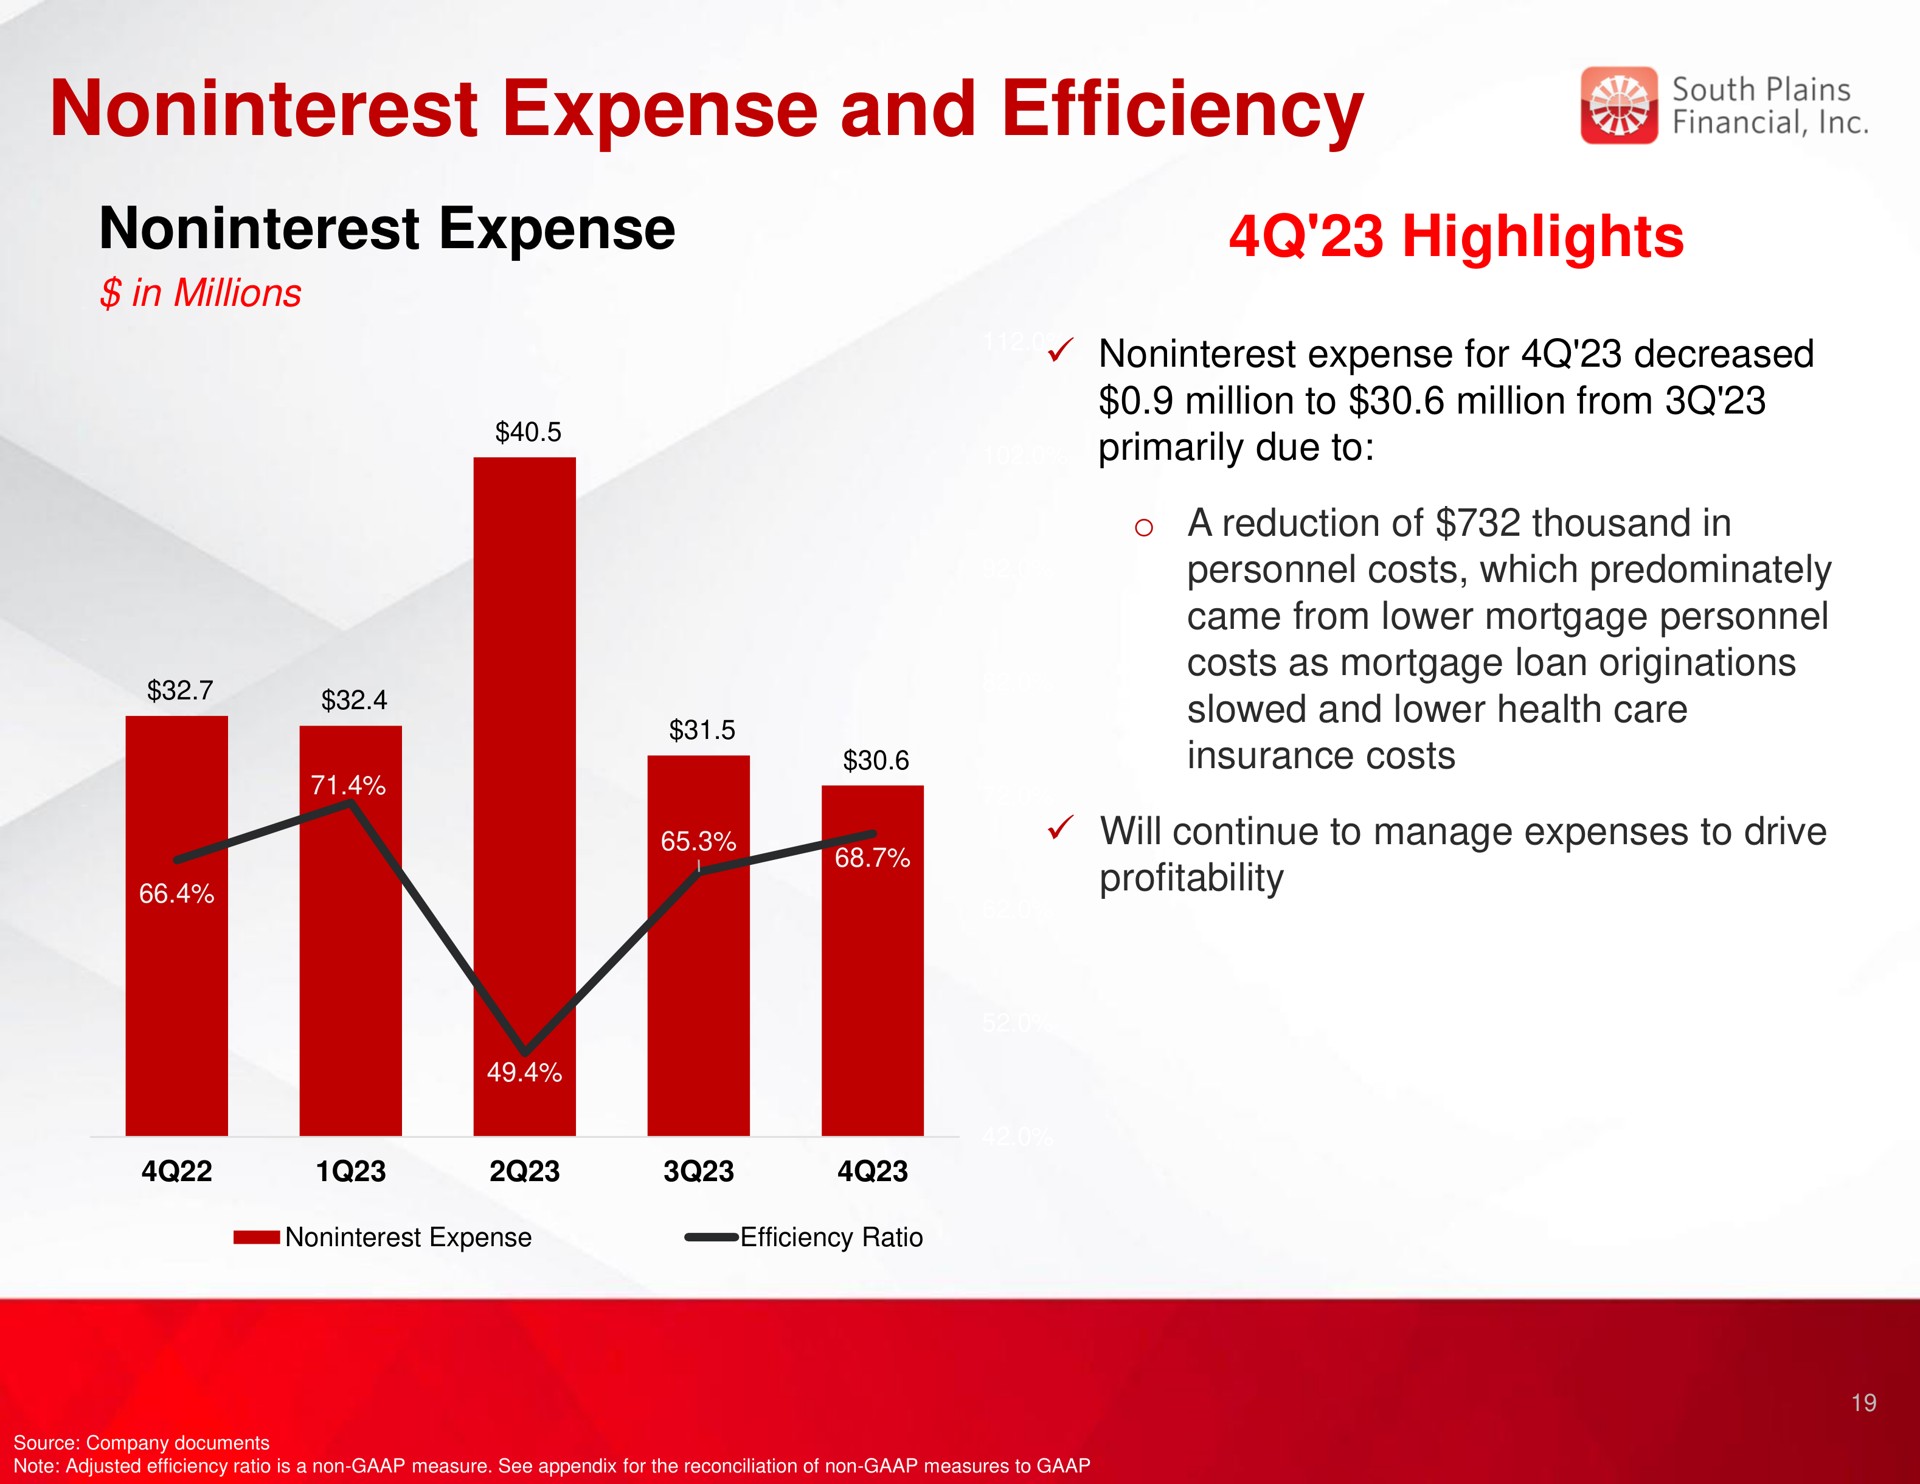 expense and efficiency expense highlights | South Plains Financial